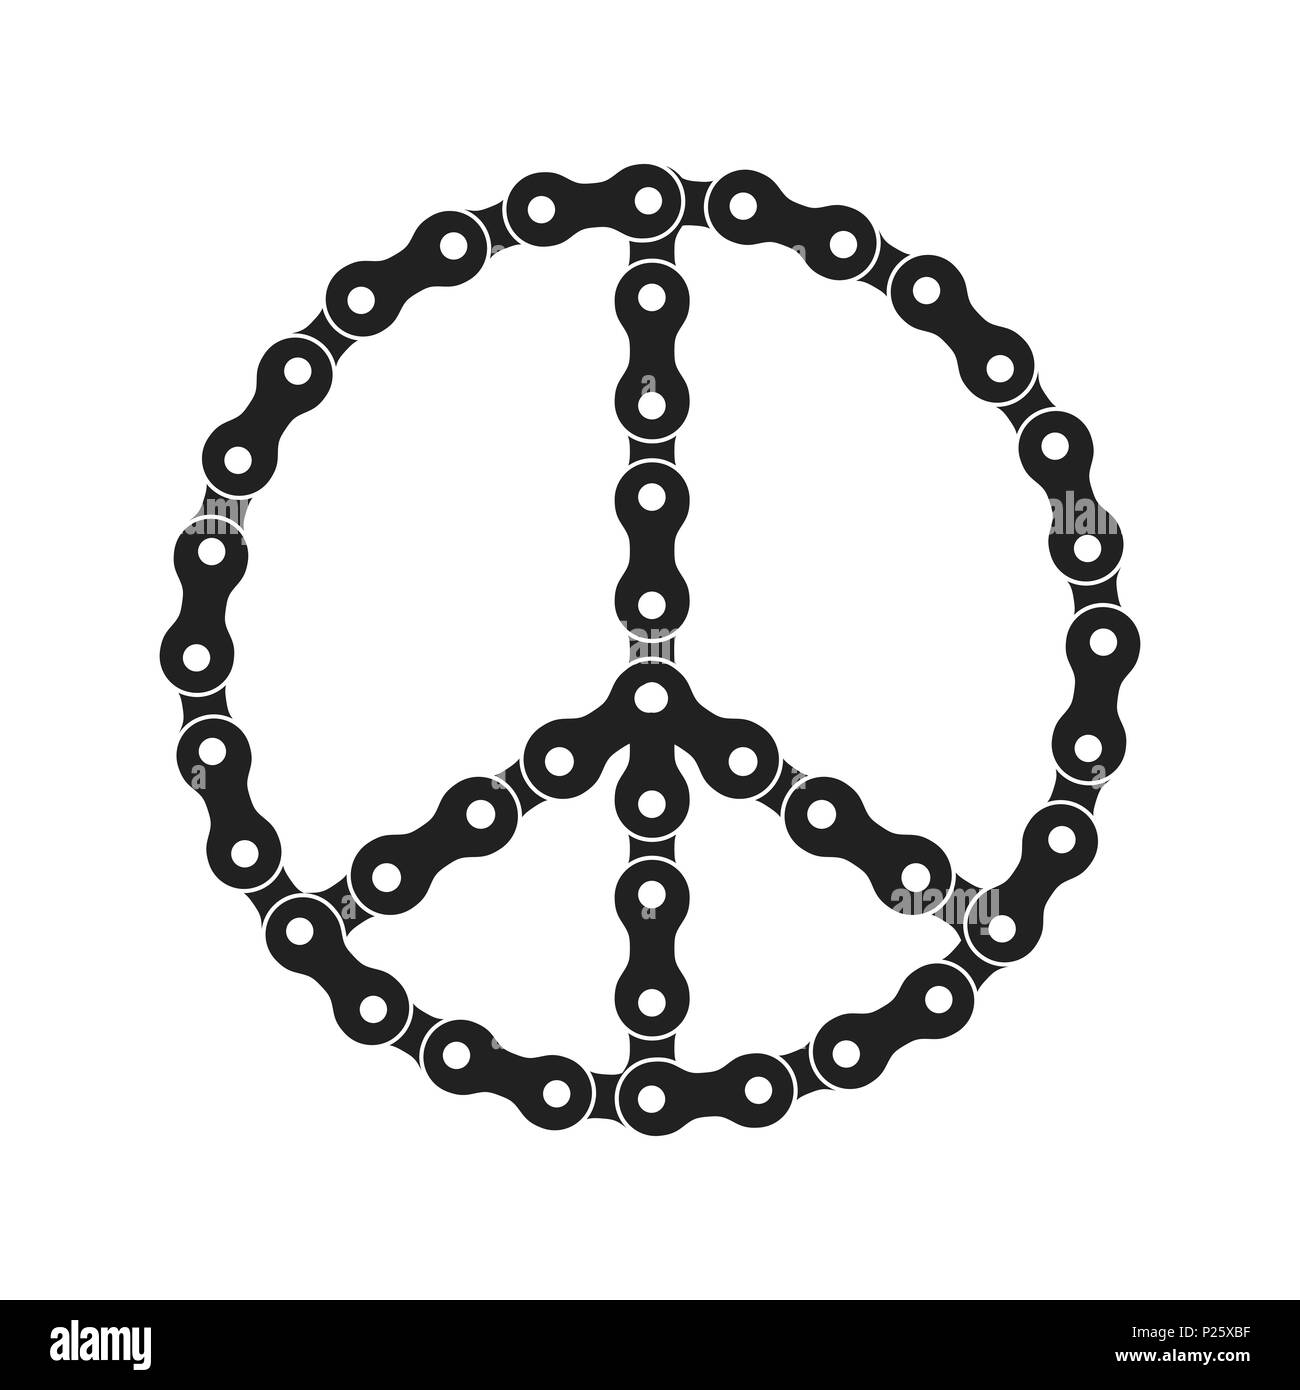 Peace Sign Made of Bike or Bicycle Chain. Hippie Symbol. Black Monochrome Bike Chain. Stock Photo